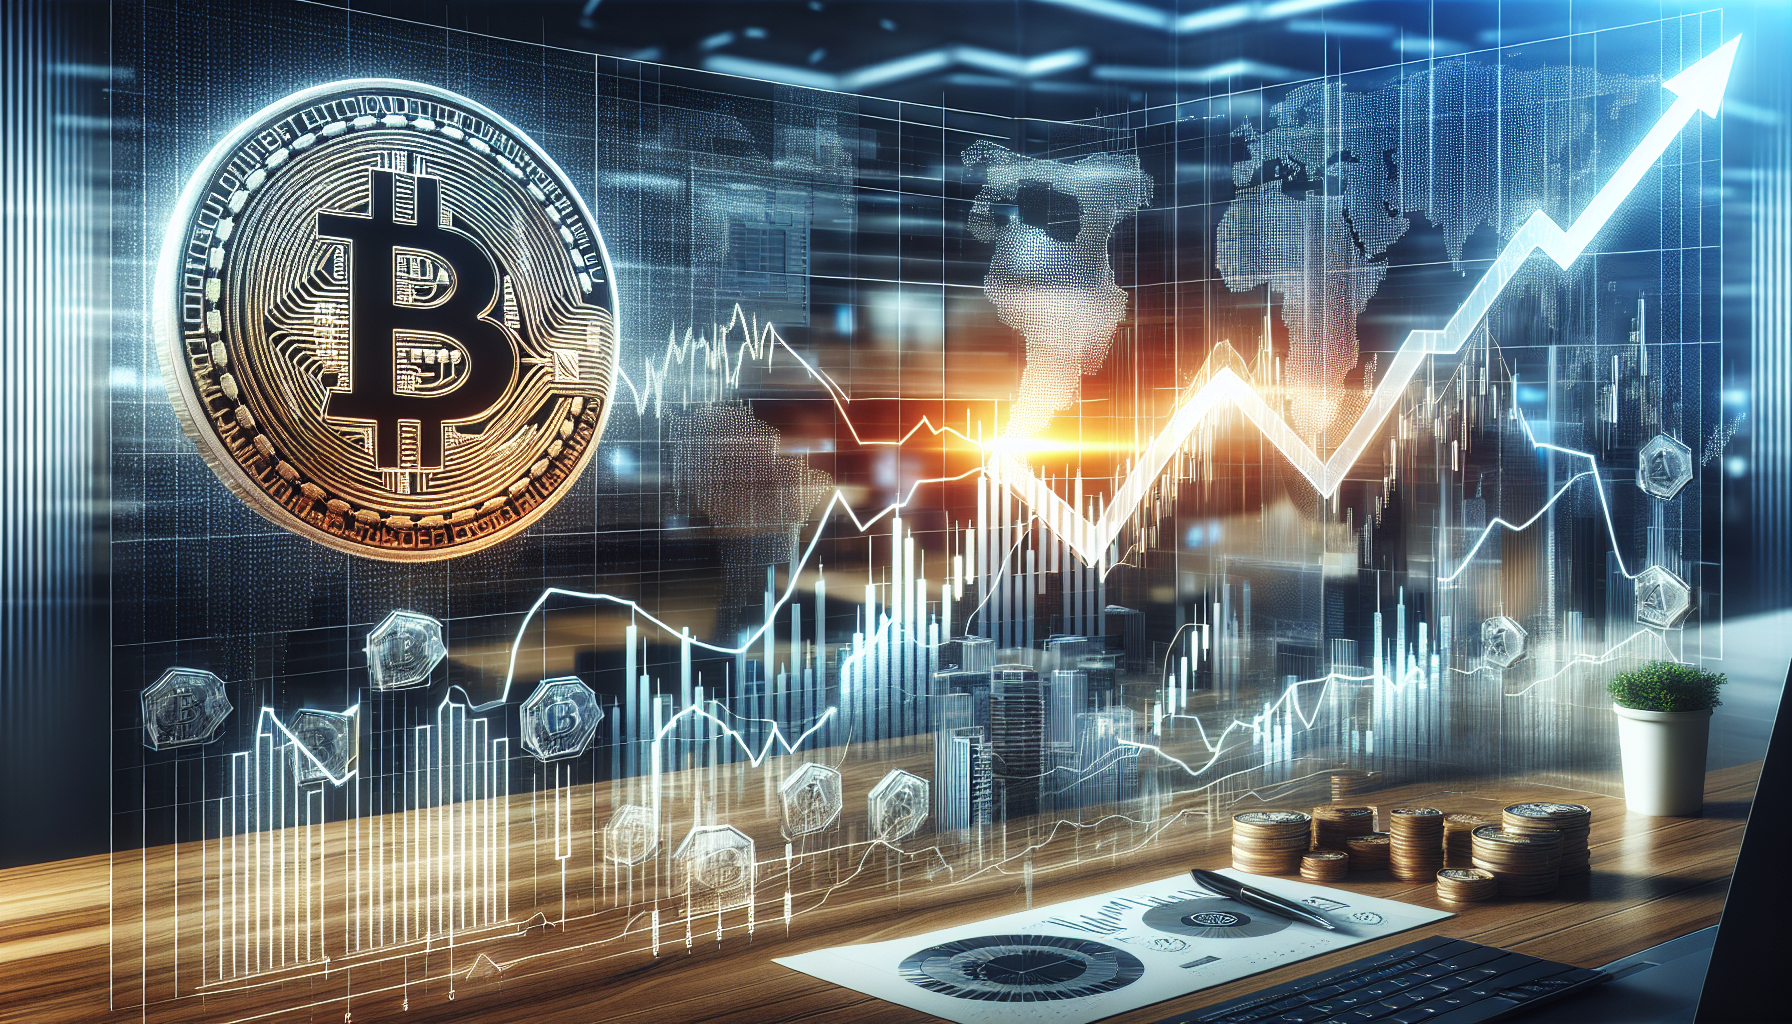 Bitcoin Price Prediction: Saylor's Stock Sell-off and CleanSpark's Innovative Desk